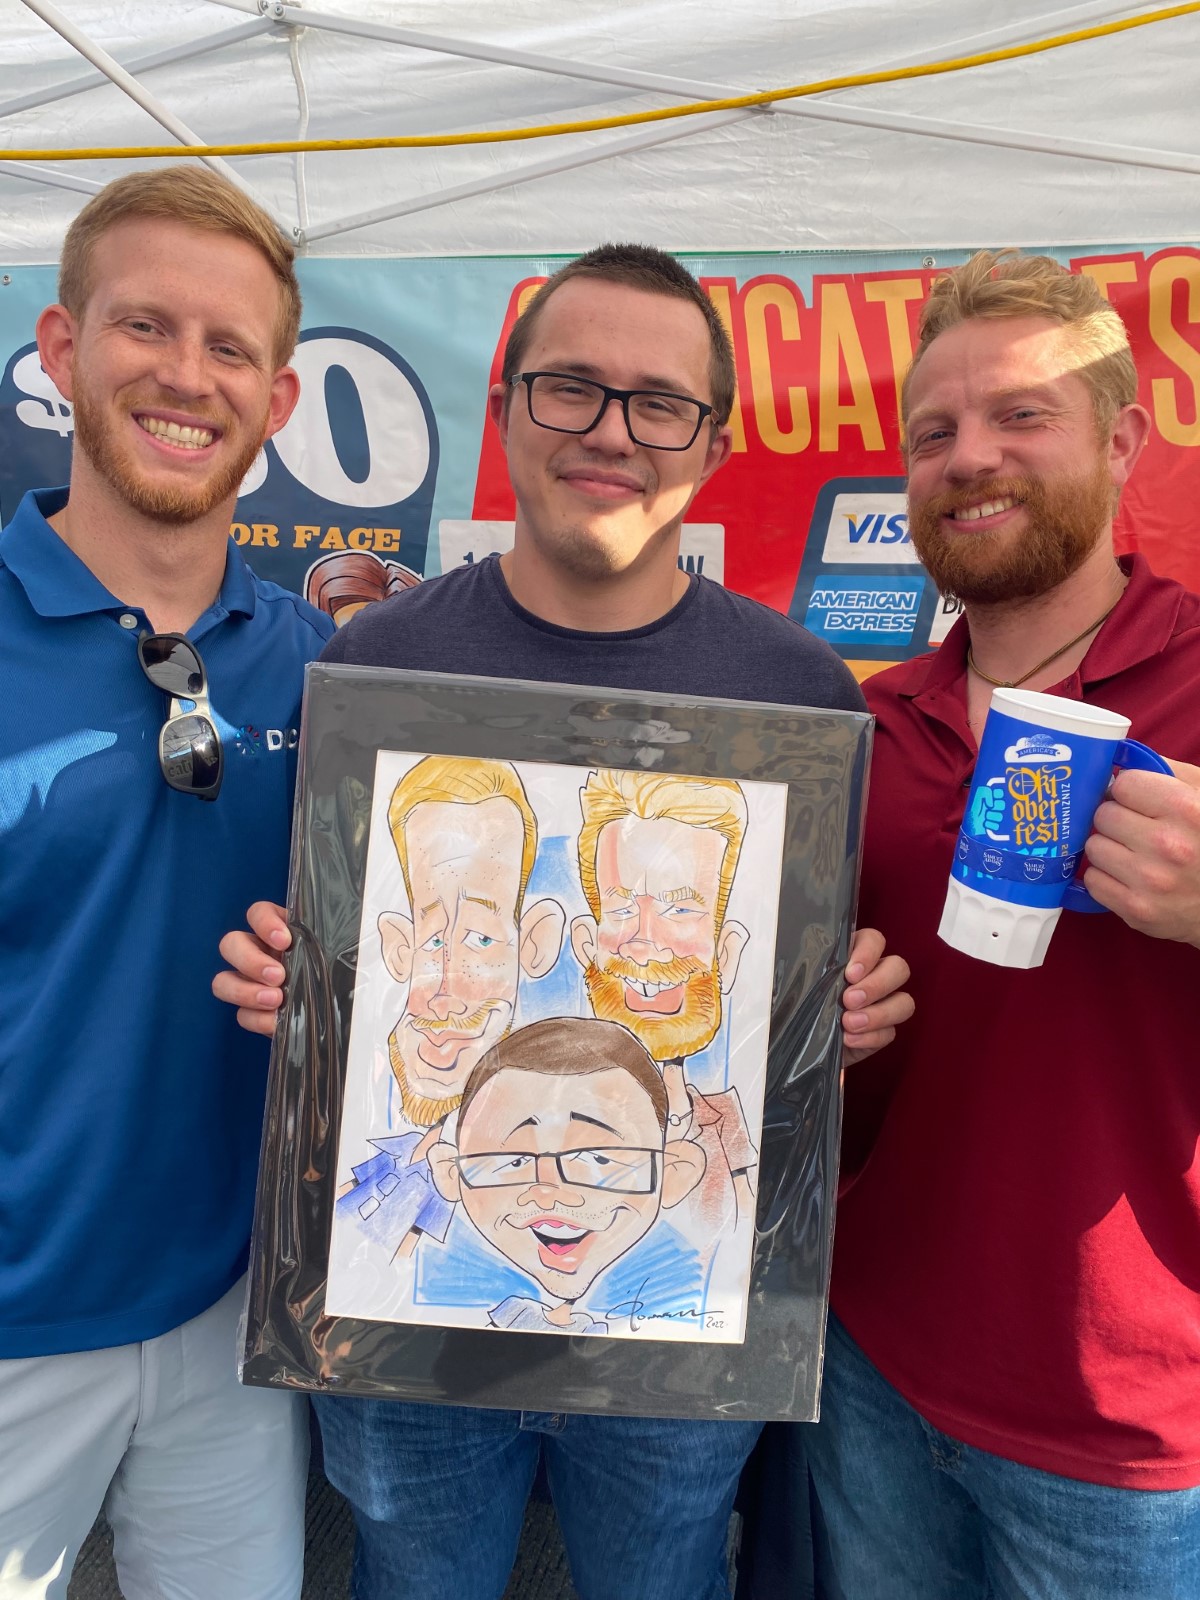 Three men hold a caricature of themselves at a fair.